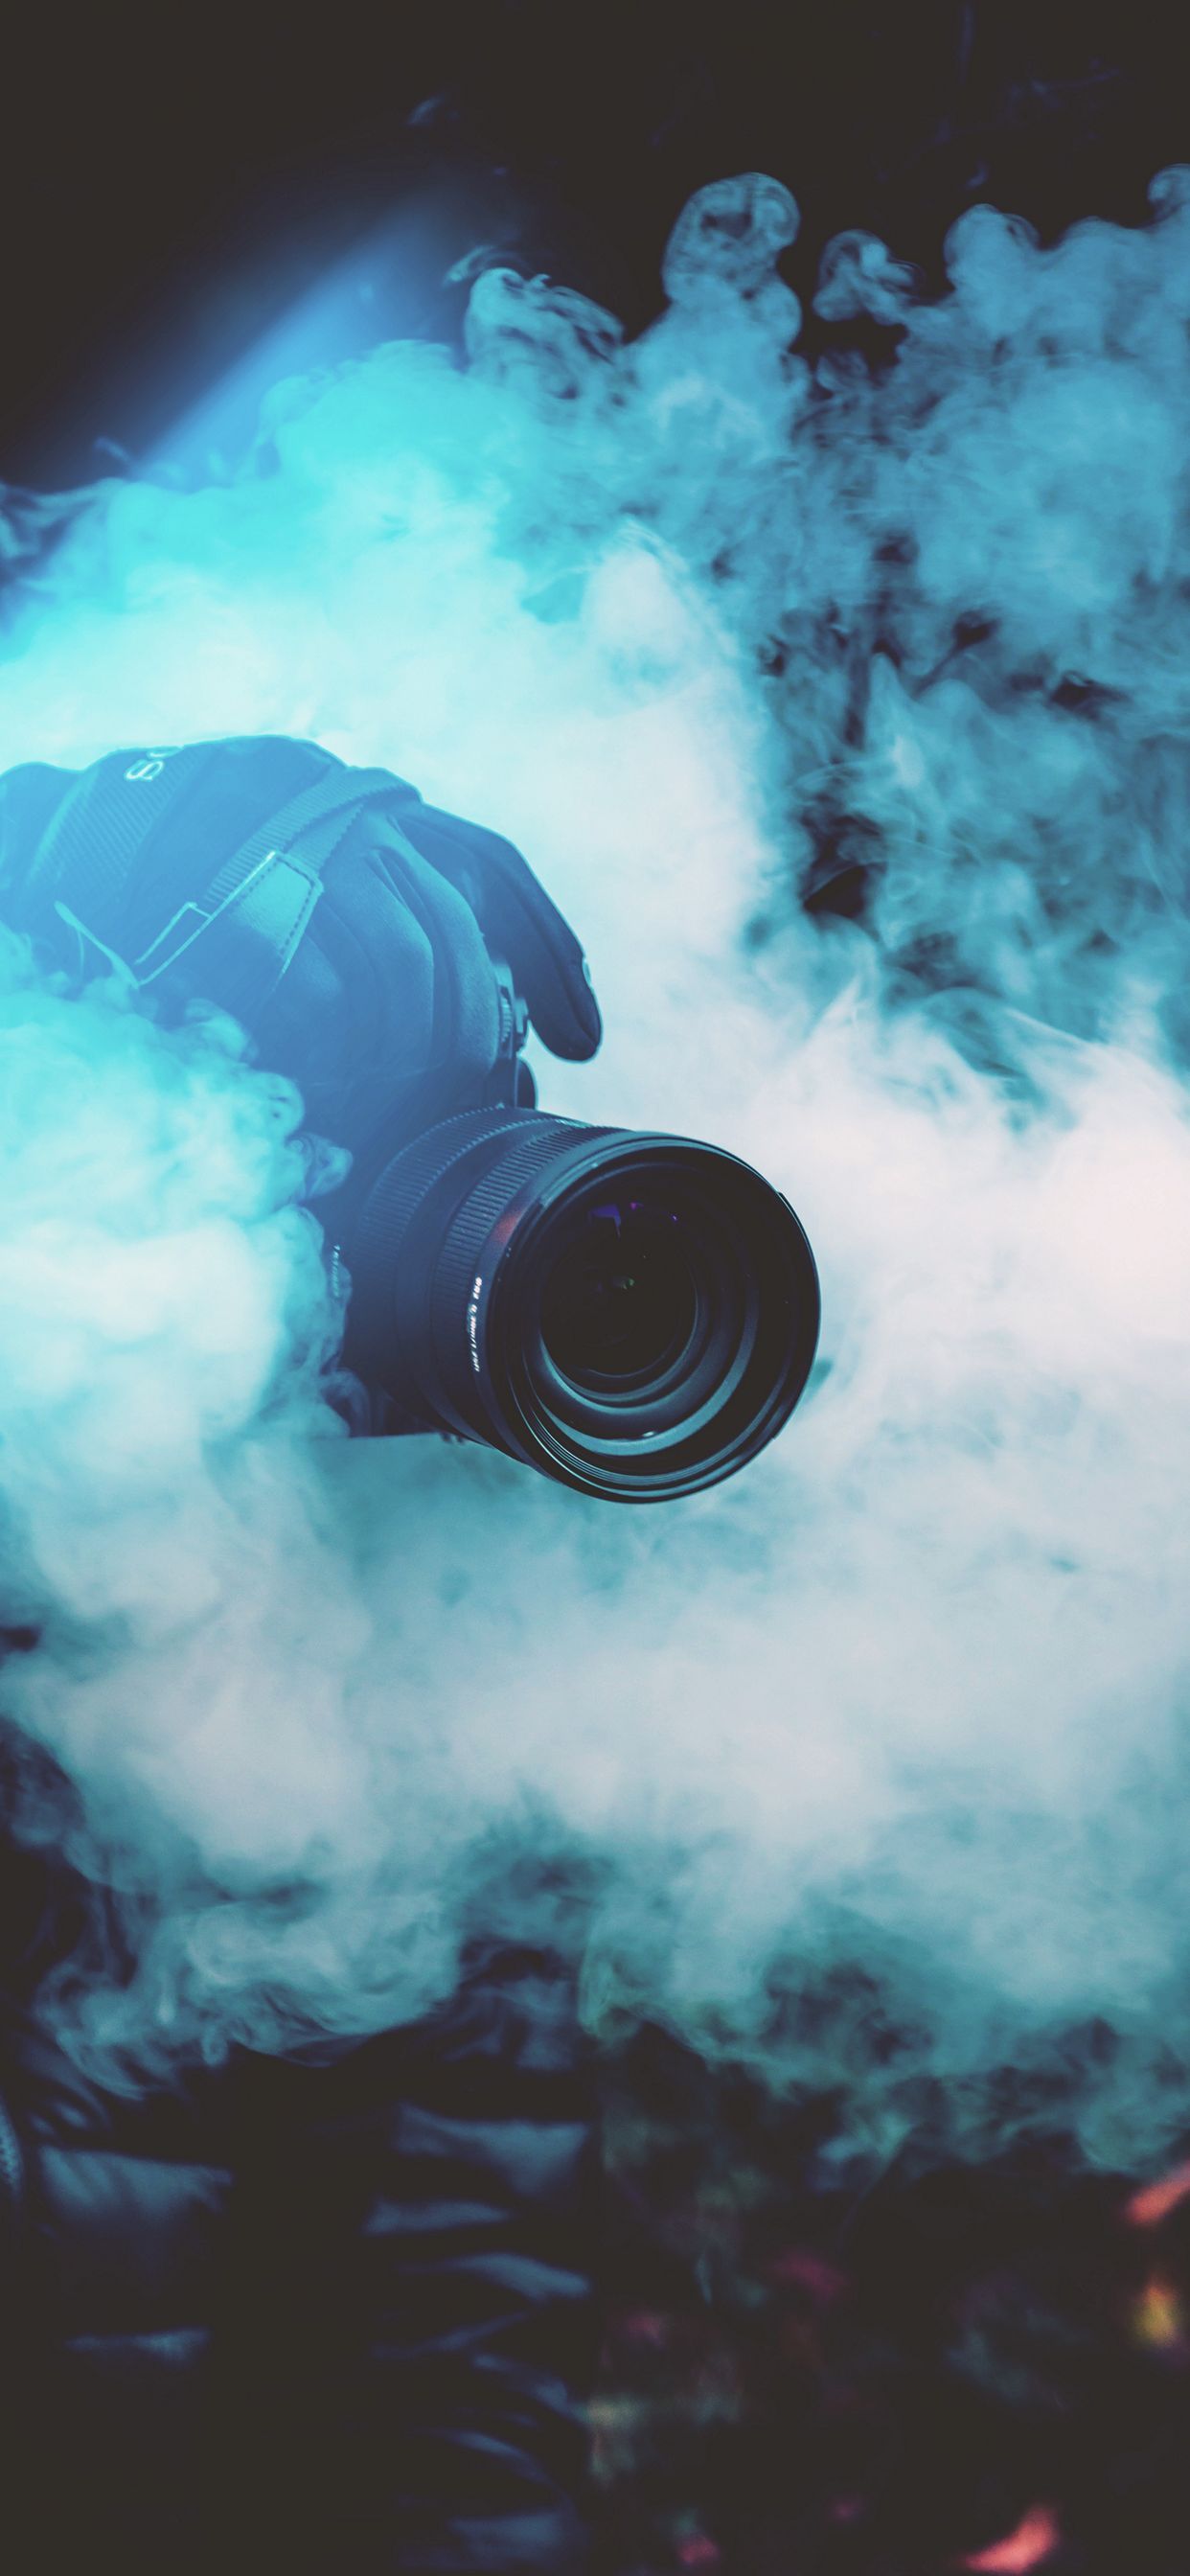 Videography Background HD Wallpaper